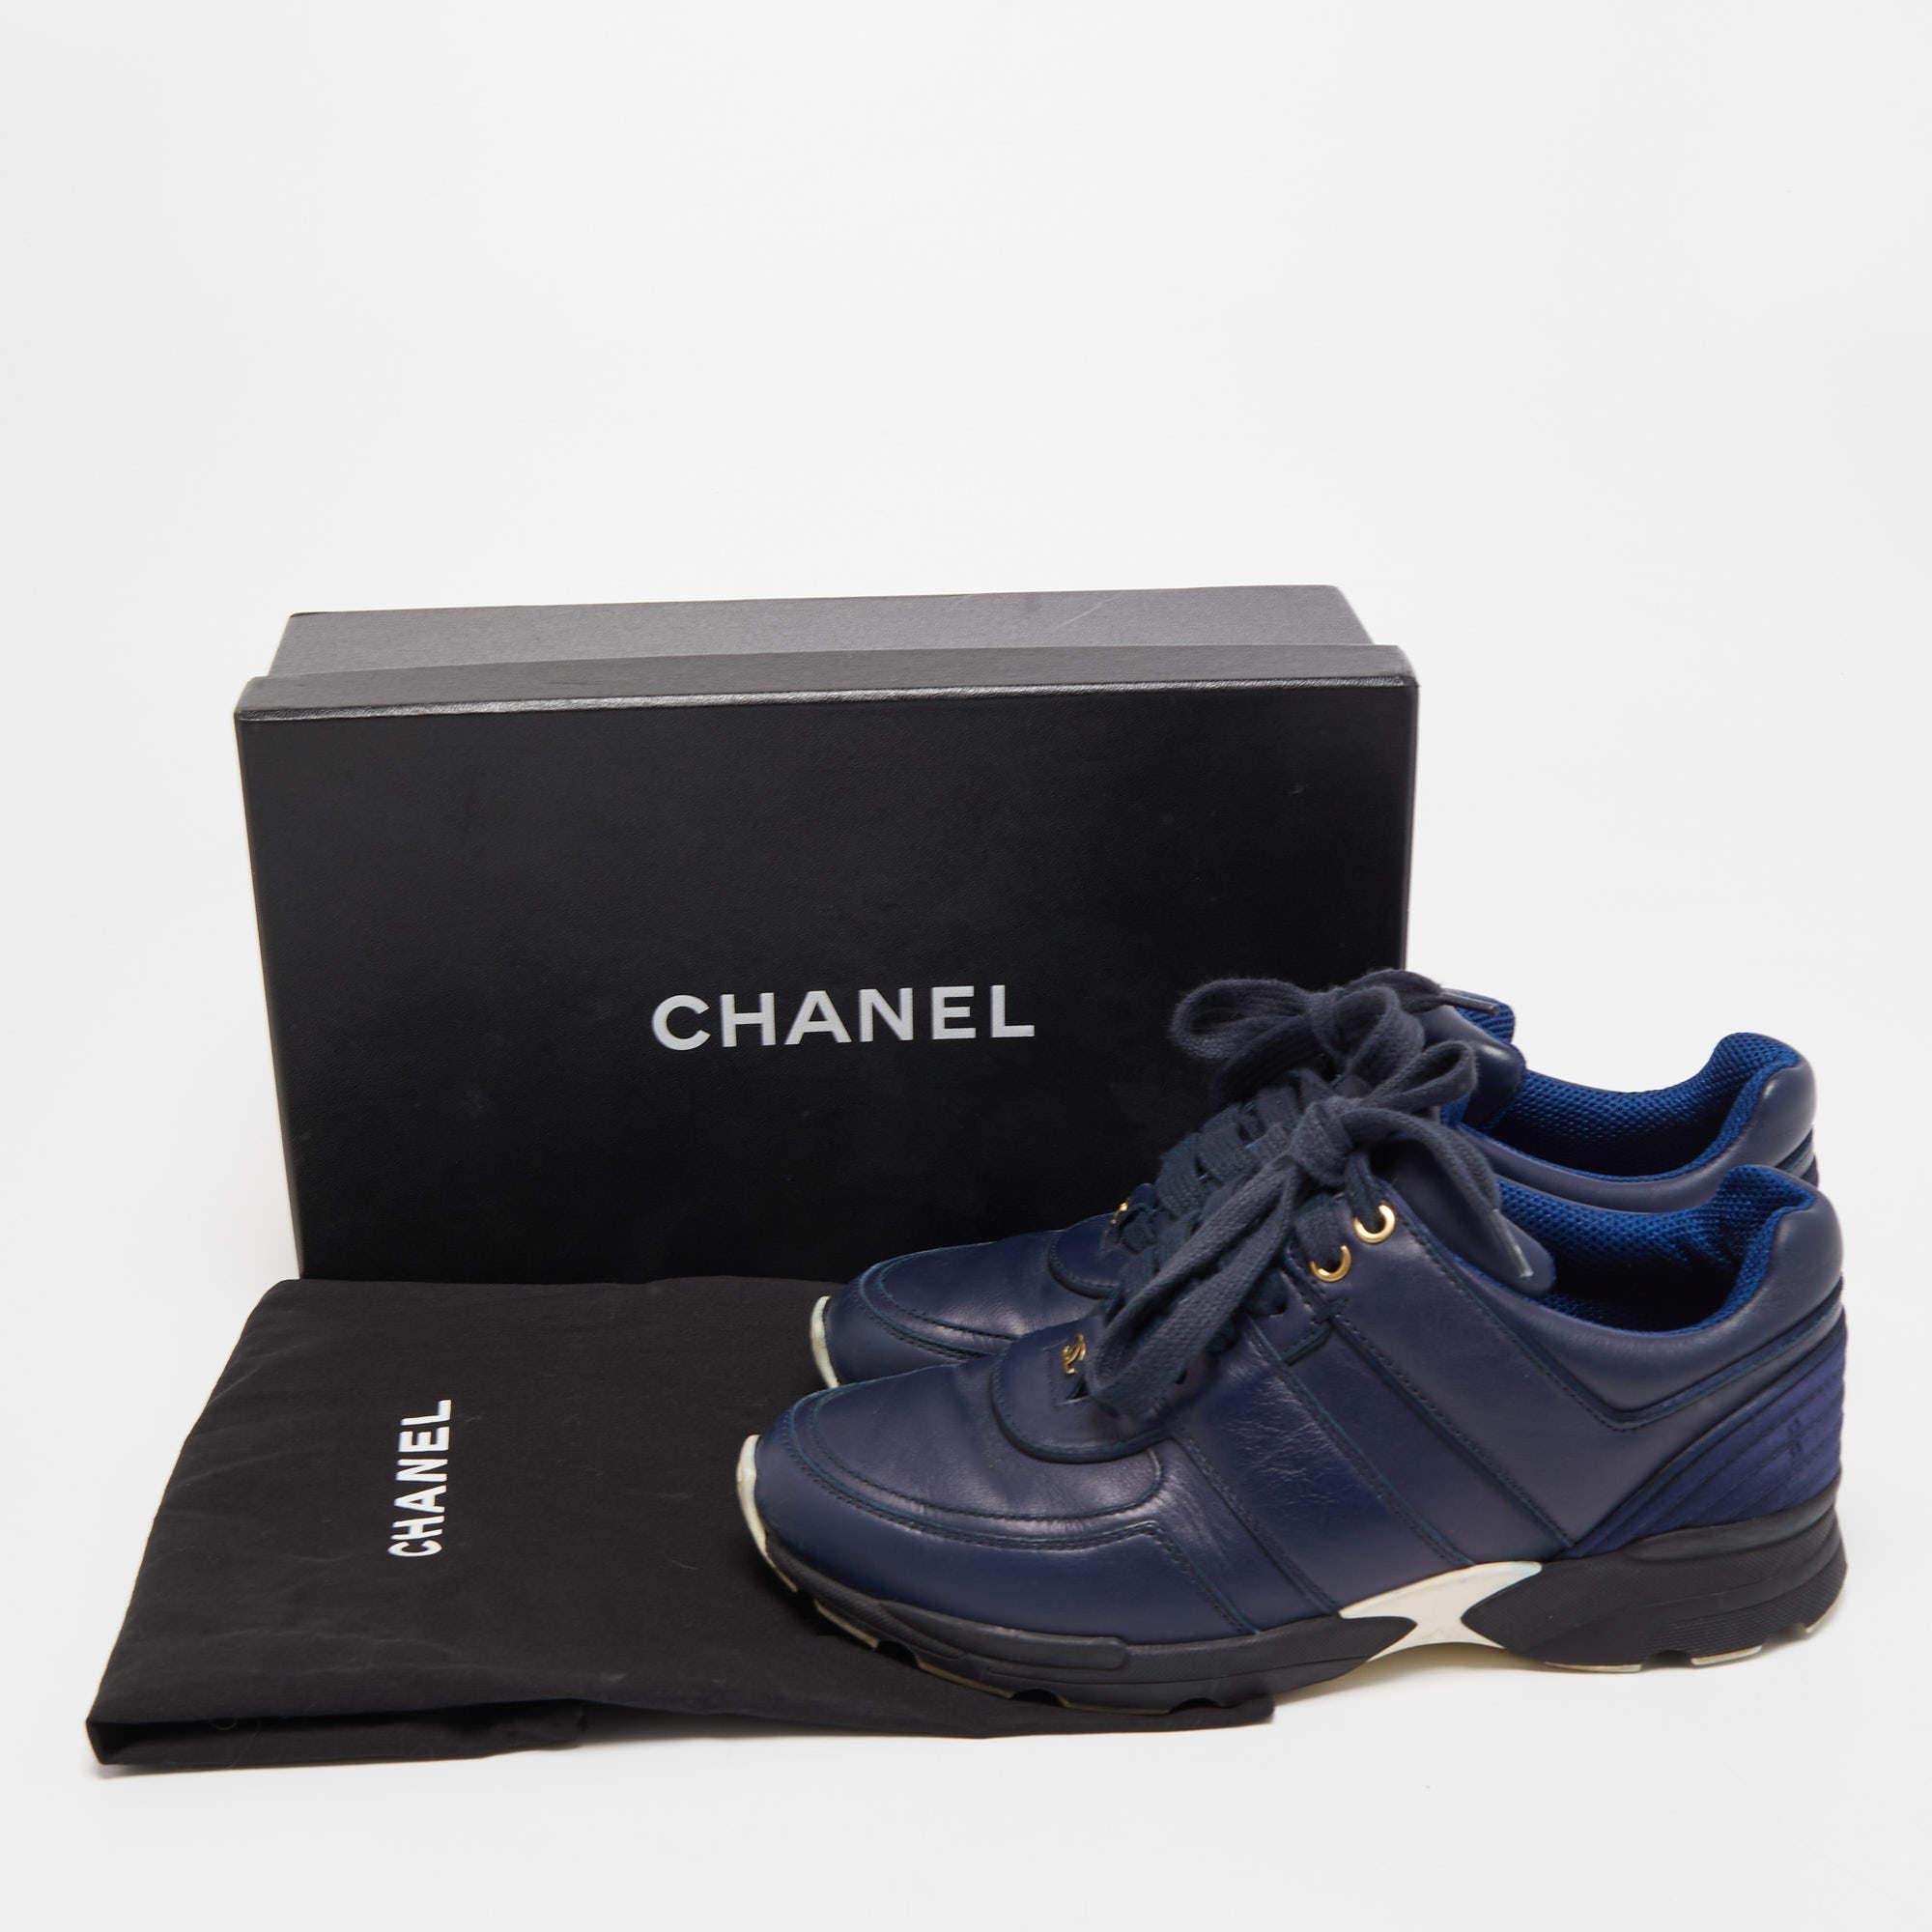 Chanel Navy Blue Satin And Leather CC Low Top Sneakers Size 37.5 5